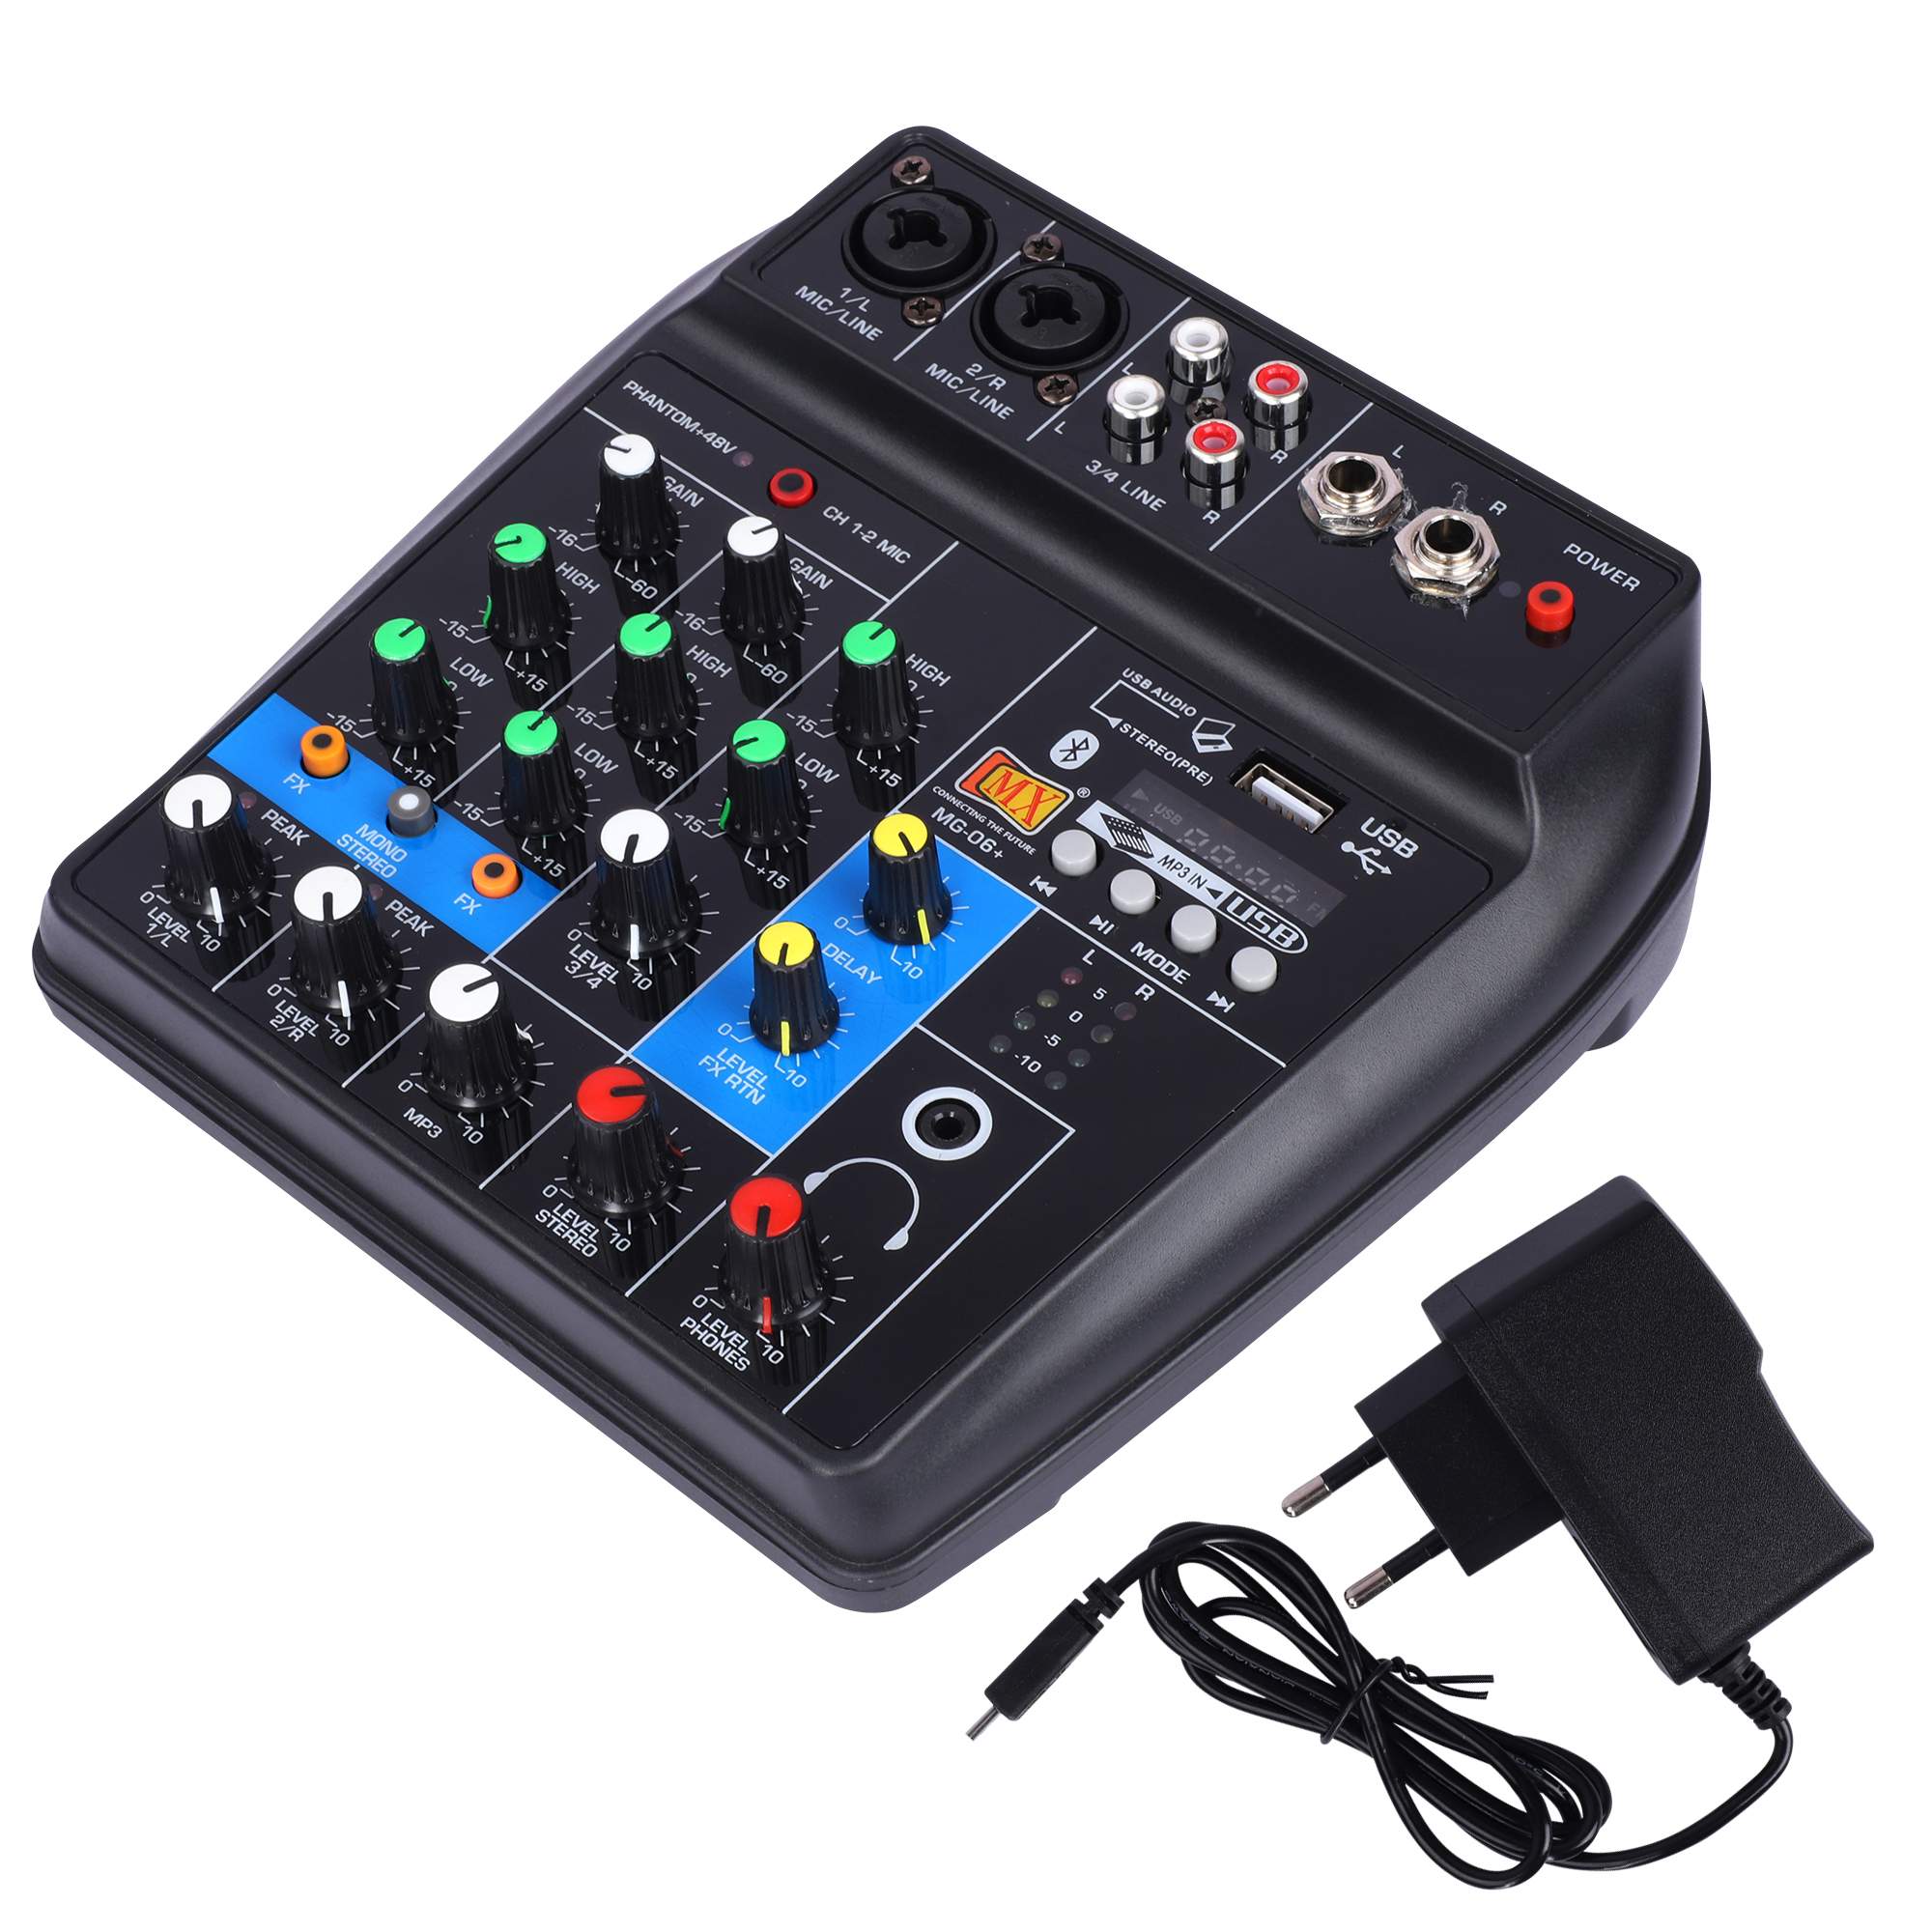 MX 4 Channel Audio Mixer – Basic Sound Mixing Console with Bluetooth USB  48V Phantom Power. Use for Basic audio learning set-up (NOT FOR RECORDING  or PROFESSIONAL AUDIO MIXING CONSOLE) - MX